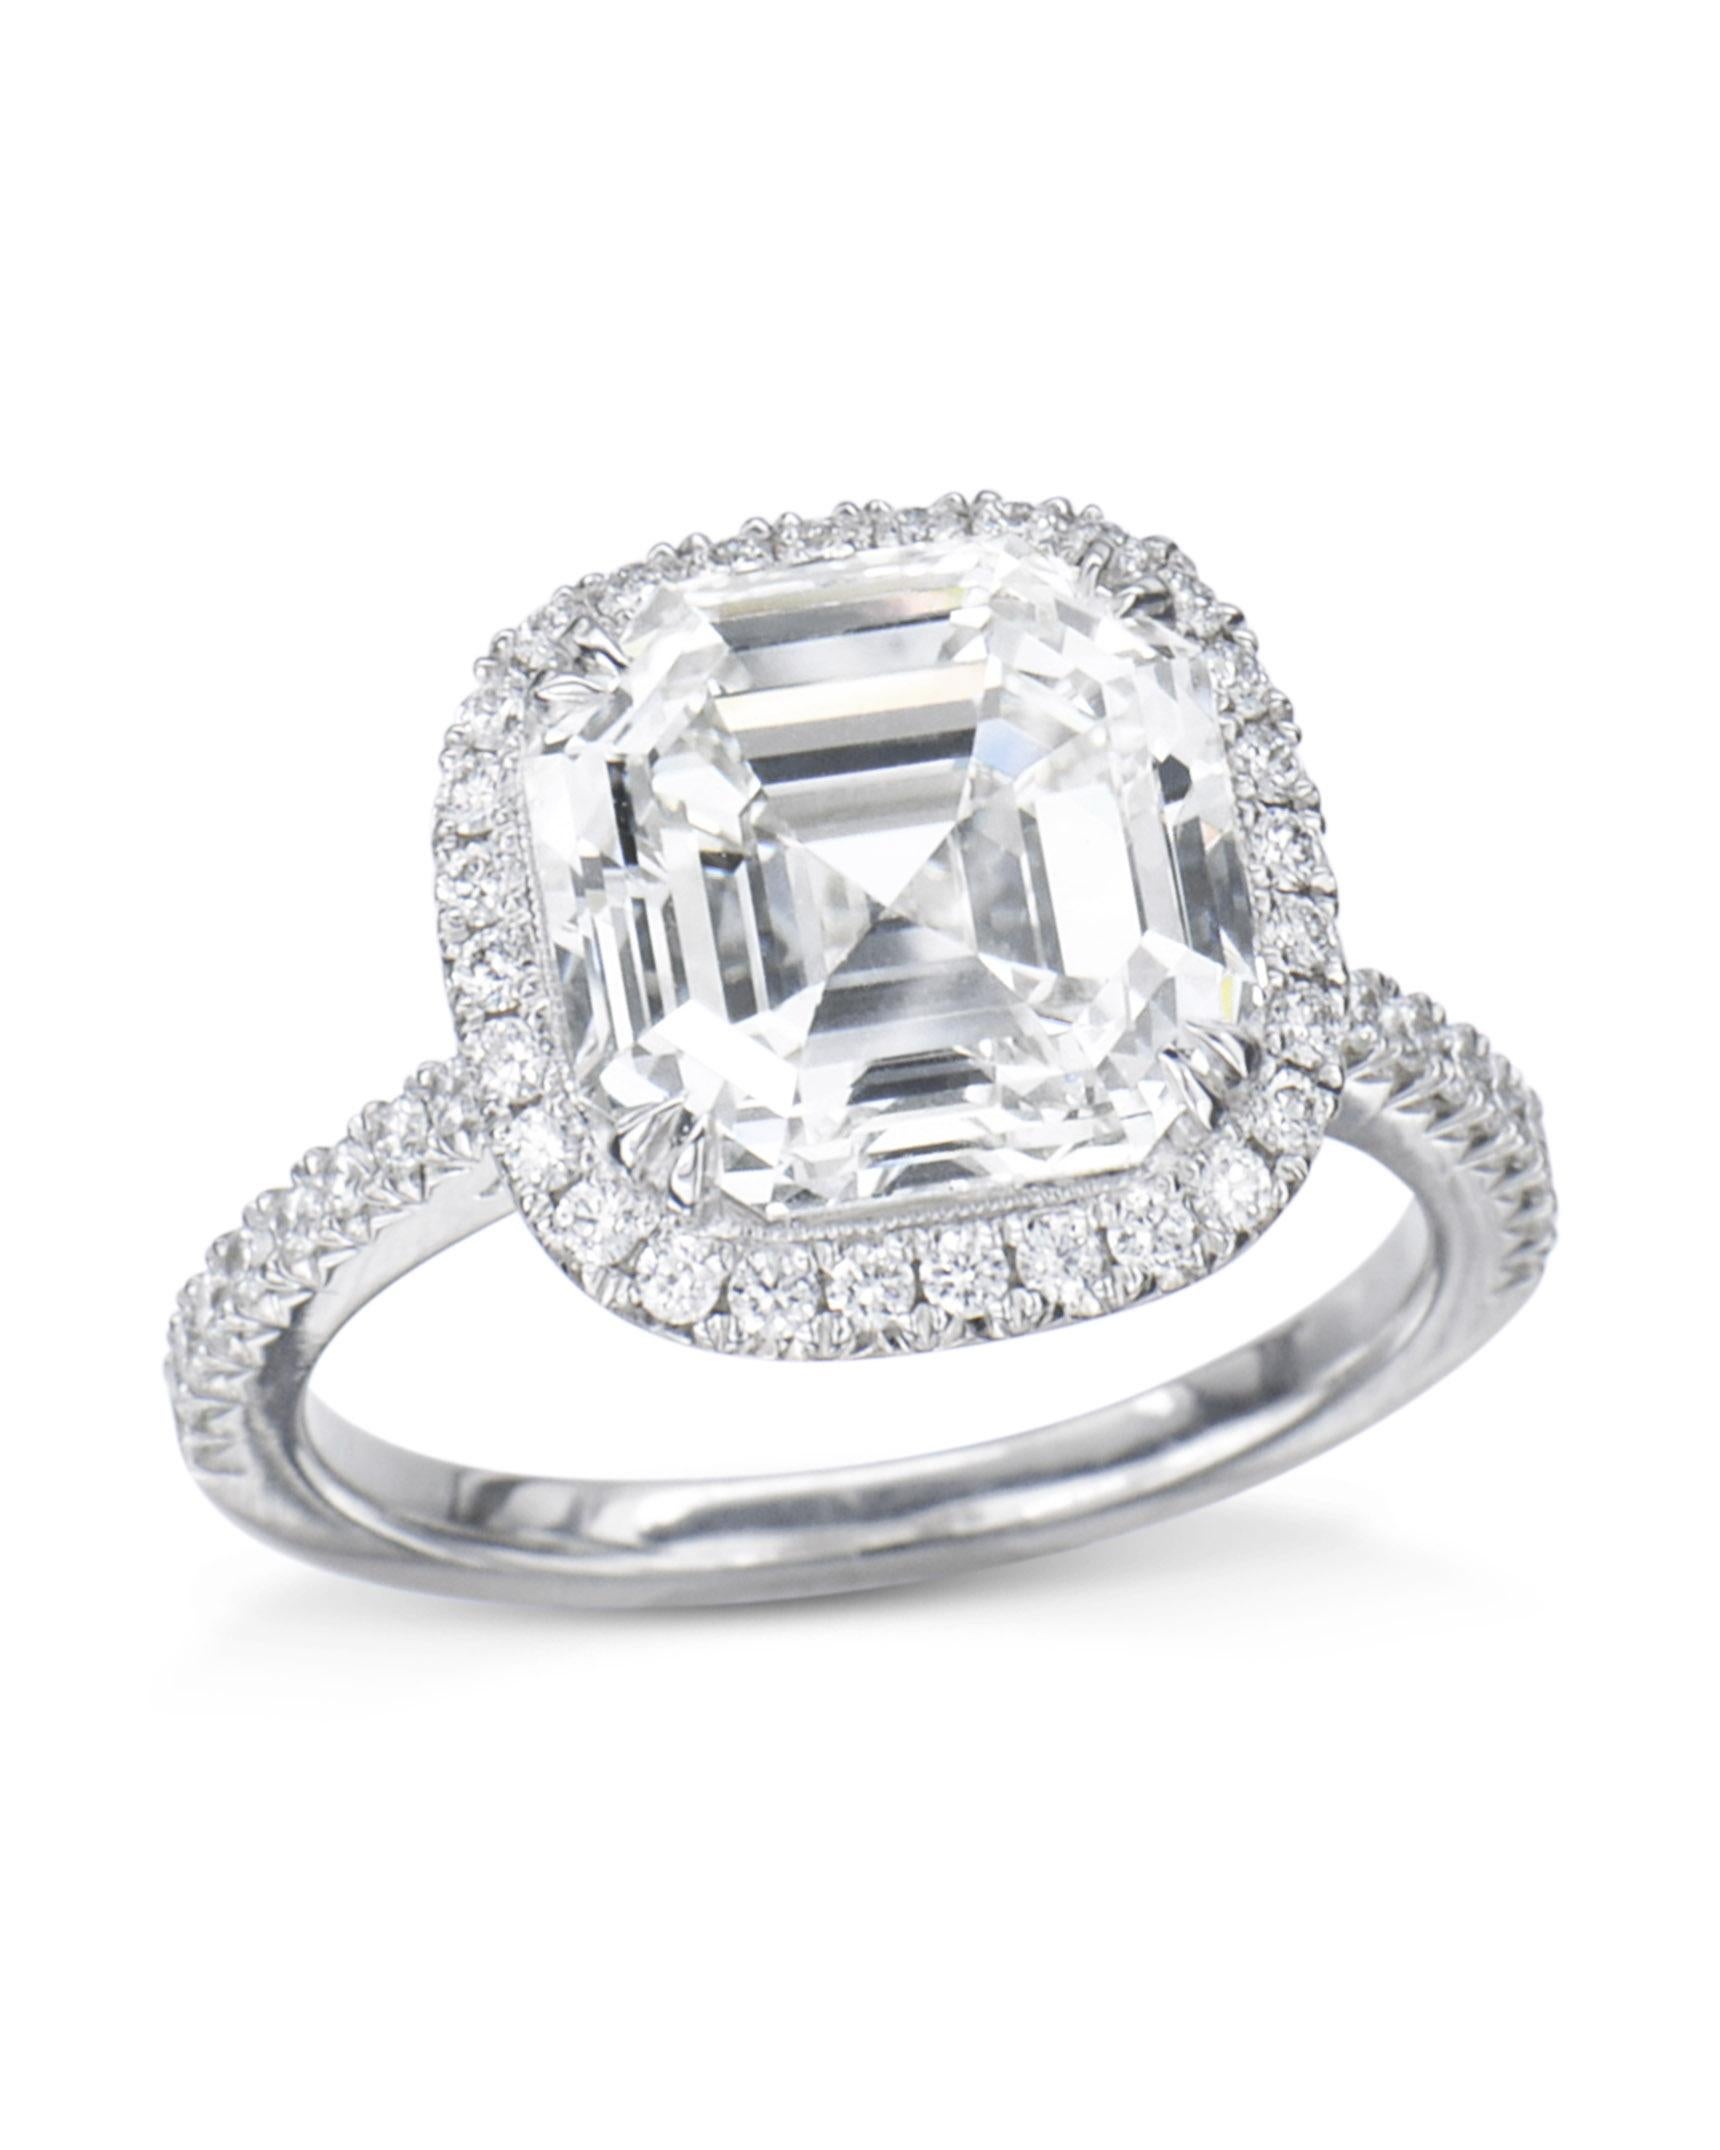 Anglo-Indian 2.00 Carat Asscher Cut GIA Diamond Engagement Ring 950 Platinum Setting For Sale